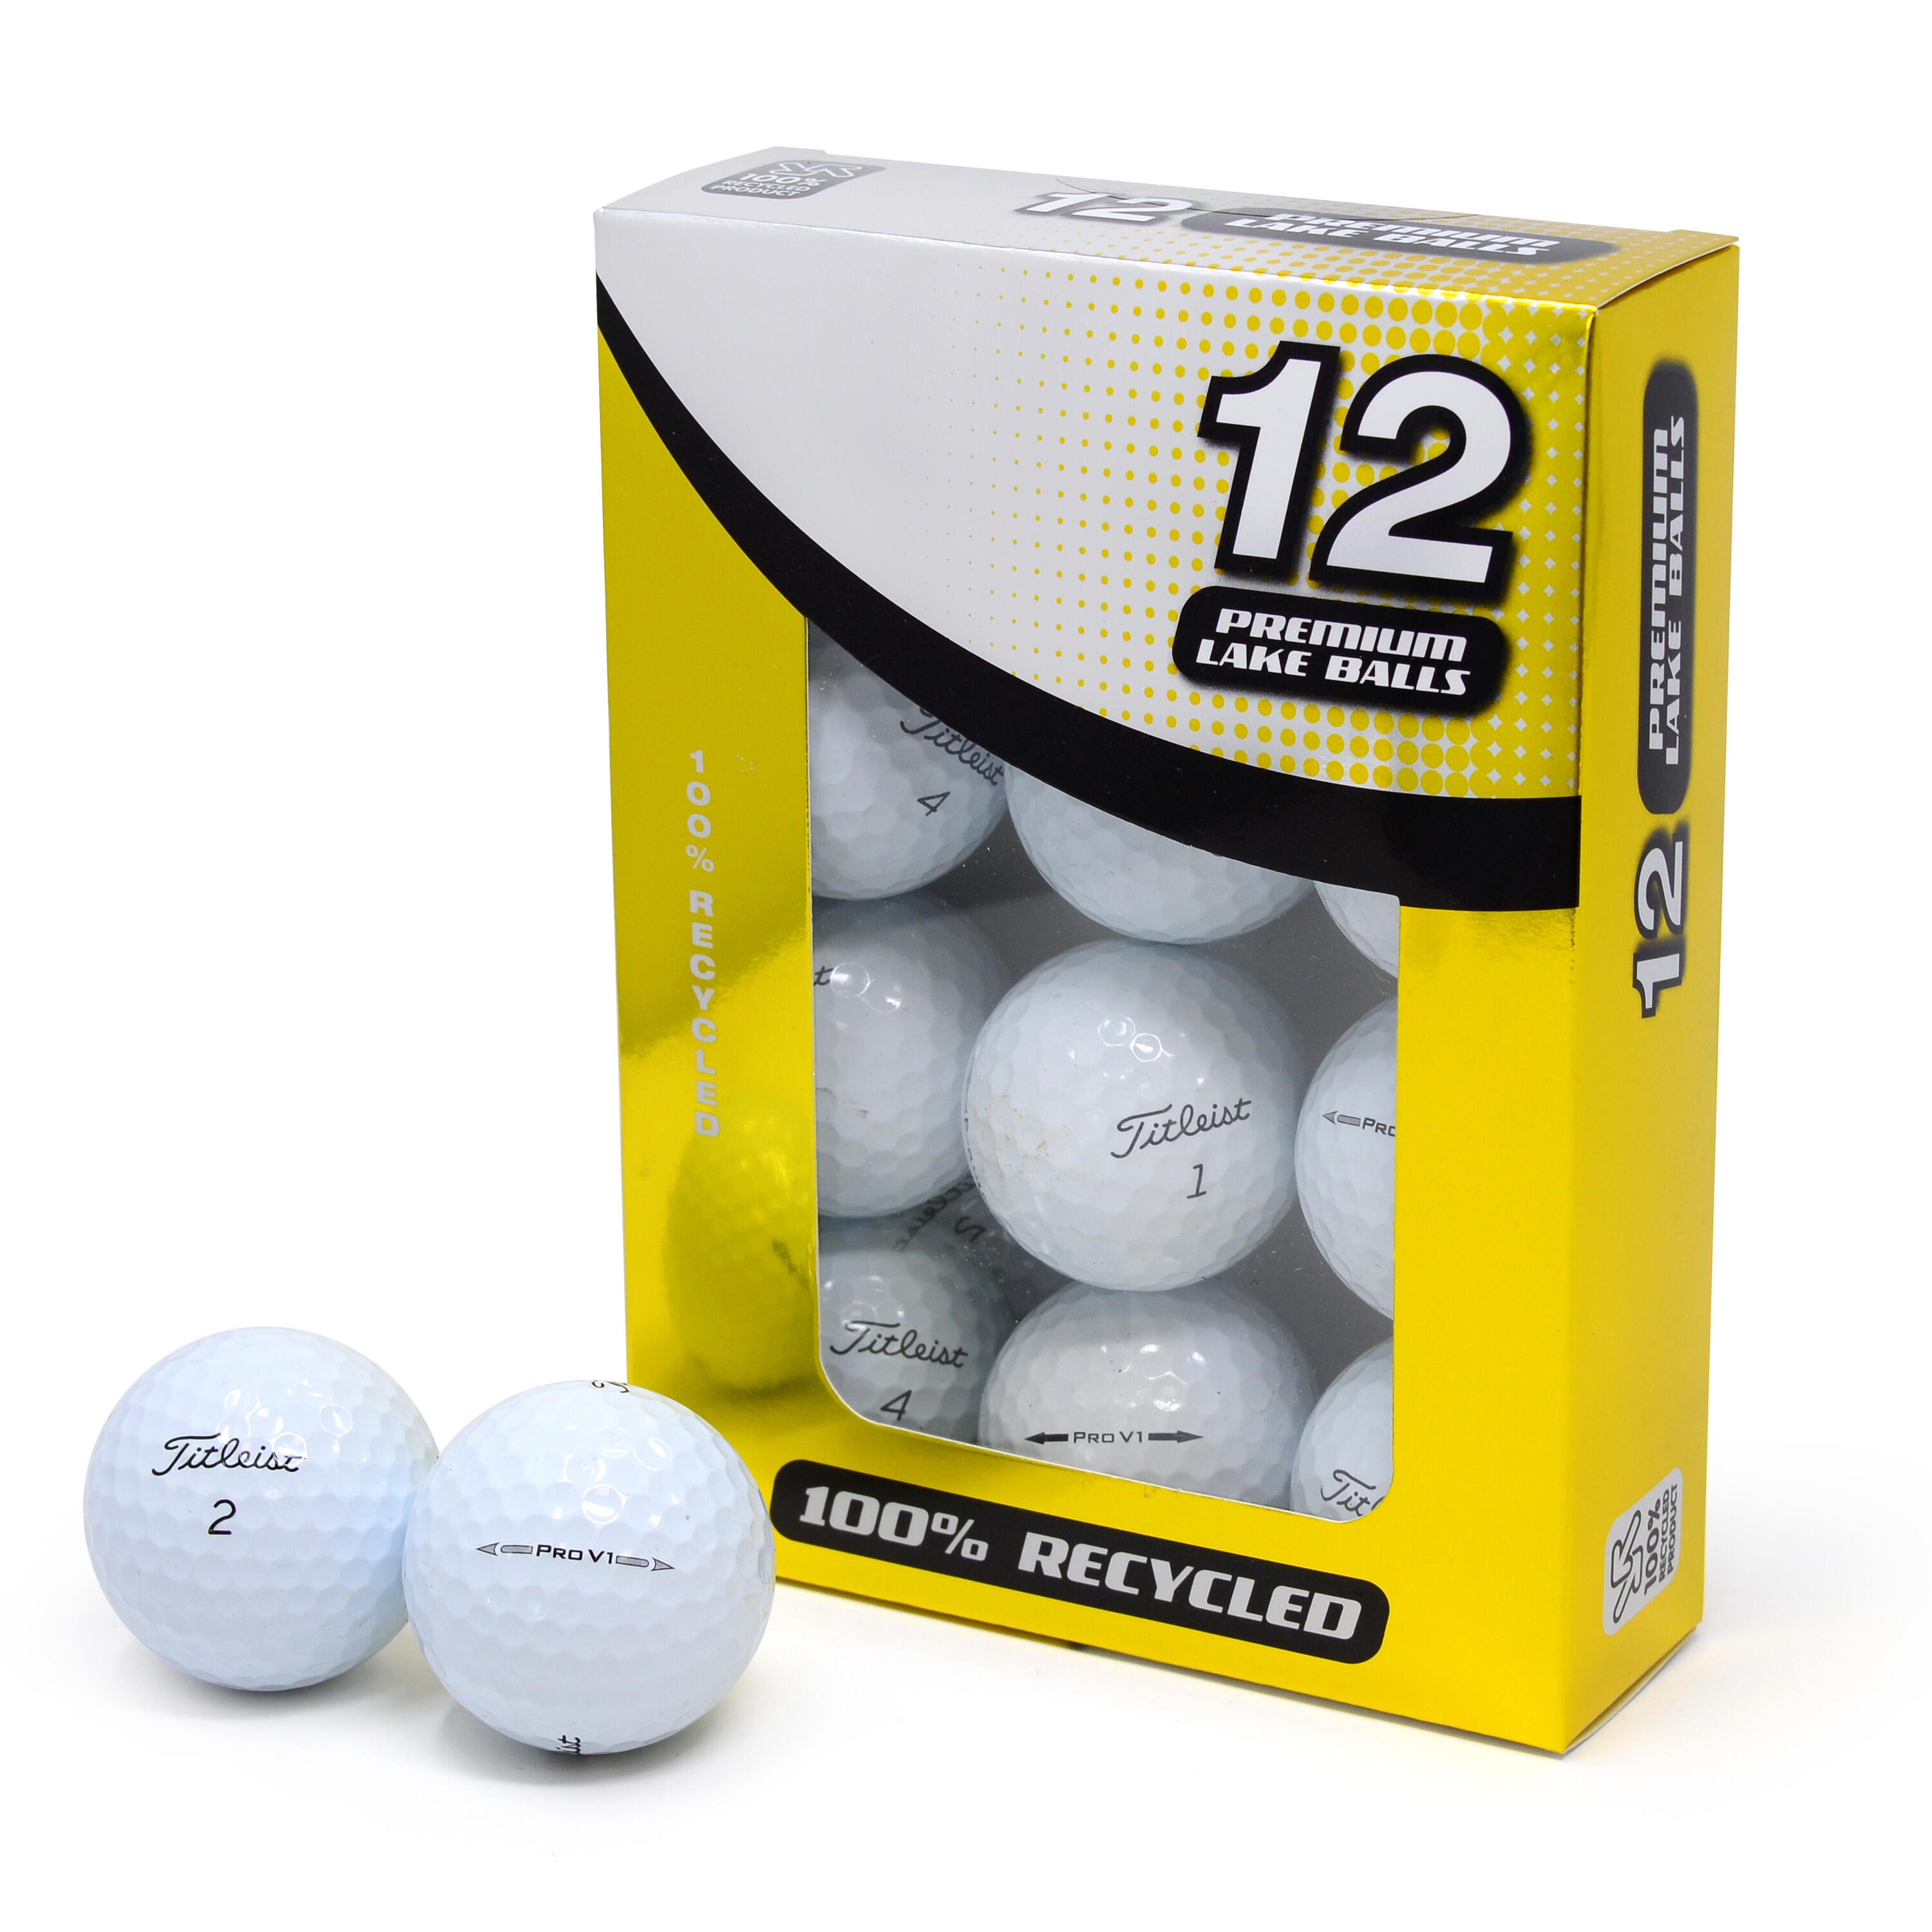 SECOND CHANCE Second Chance Titleist Pro V1 Grade A Lake Golf Balls - White, Pack of 12